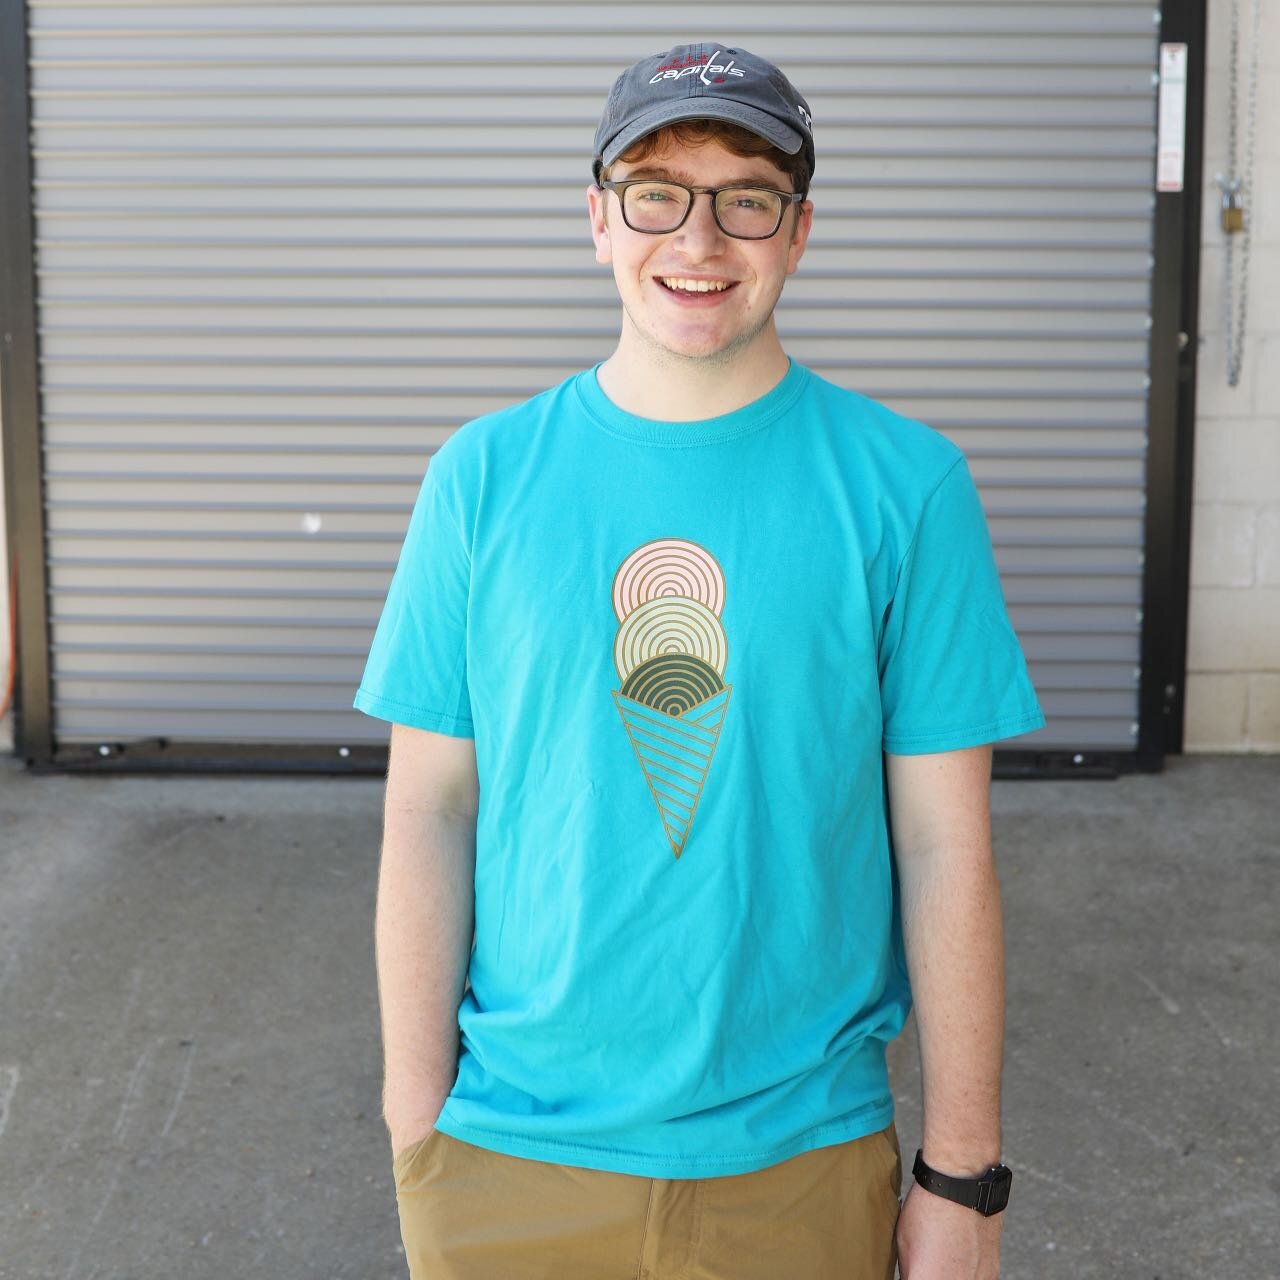 Meet our newest team member, Matthew!

He loves the outdoors, plays the guitar and brings a constant smile to the shop.